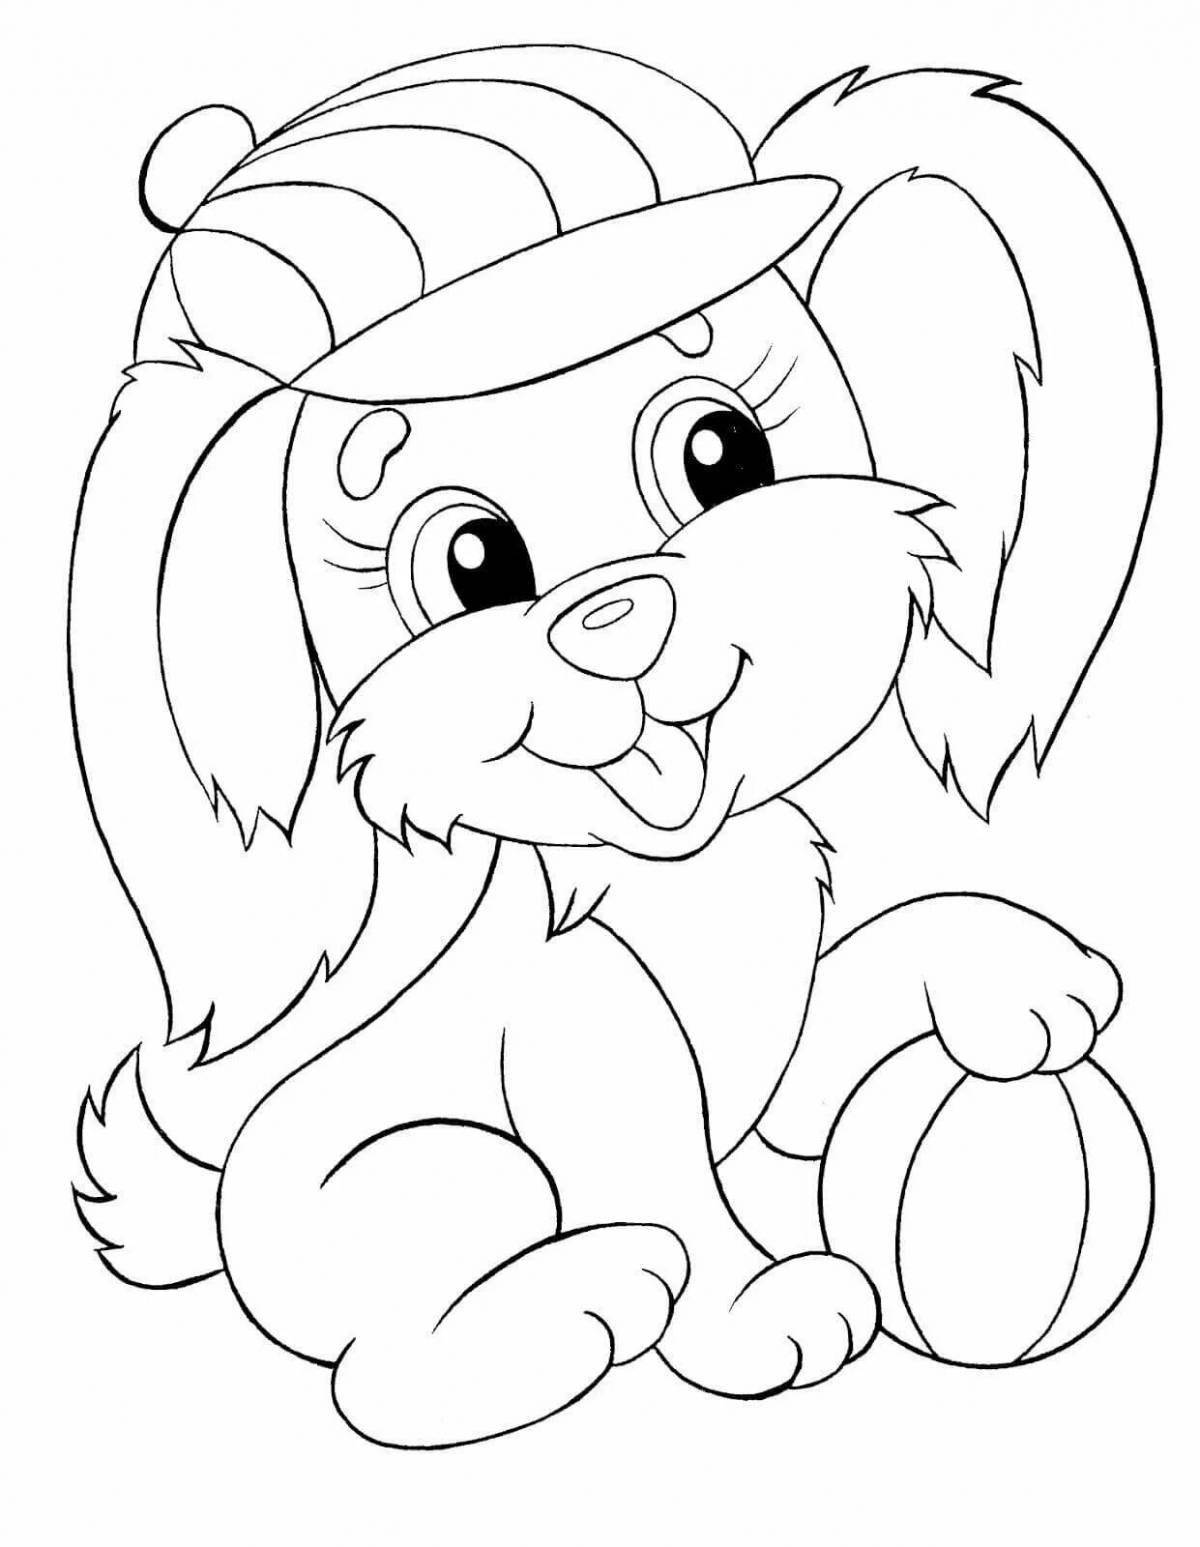 Bold coloring page format